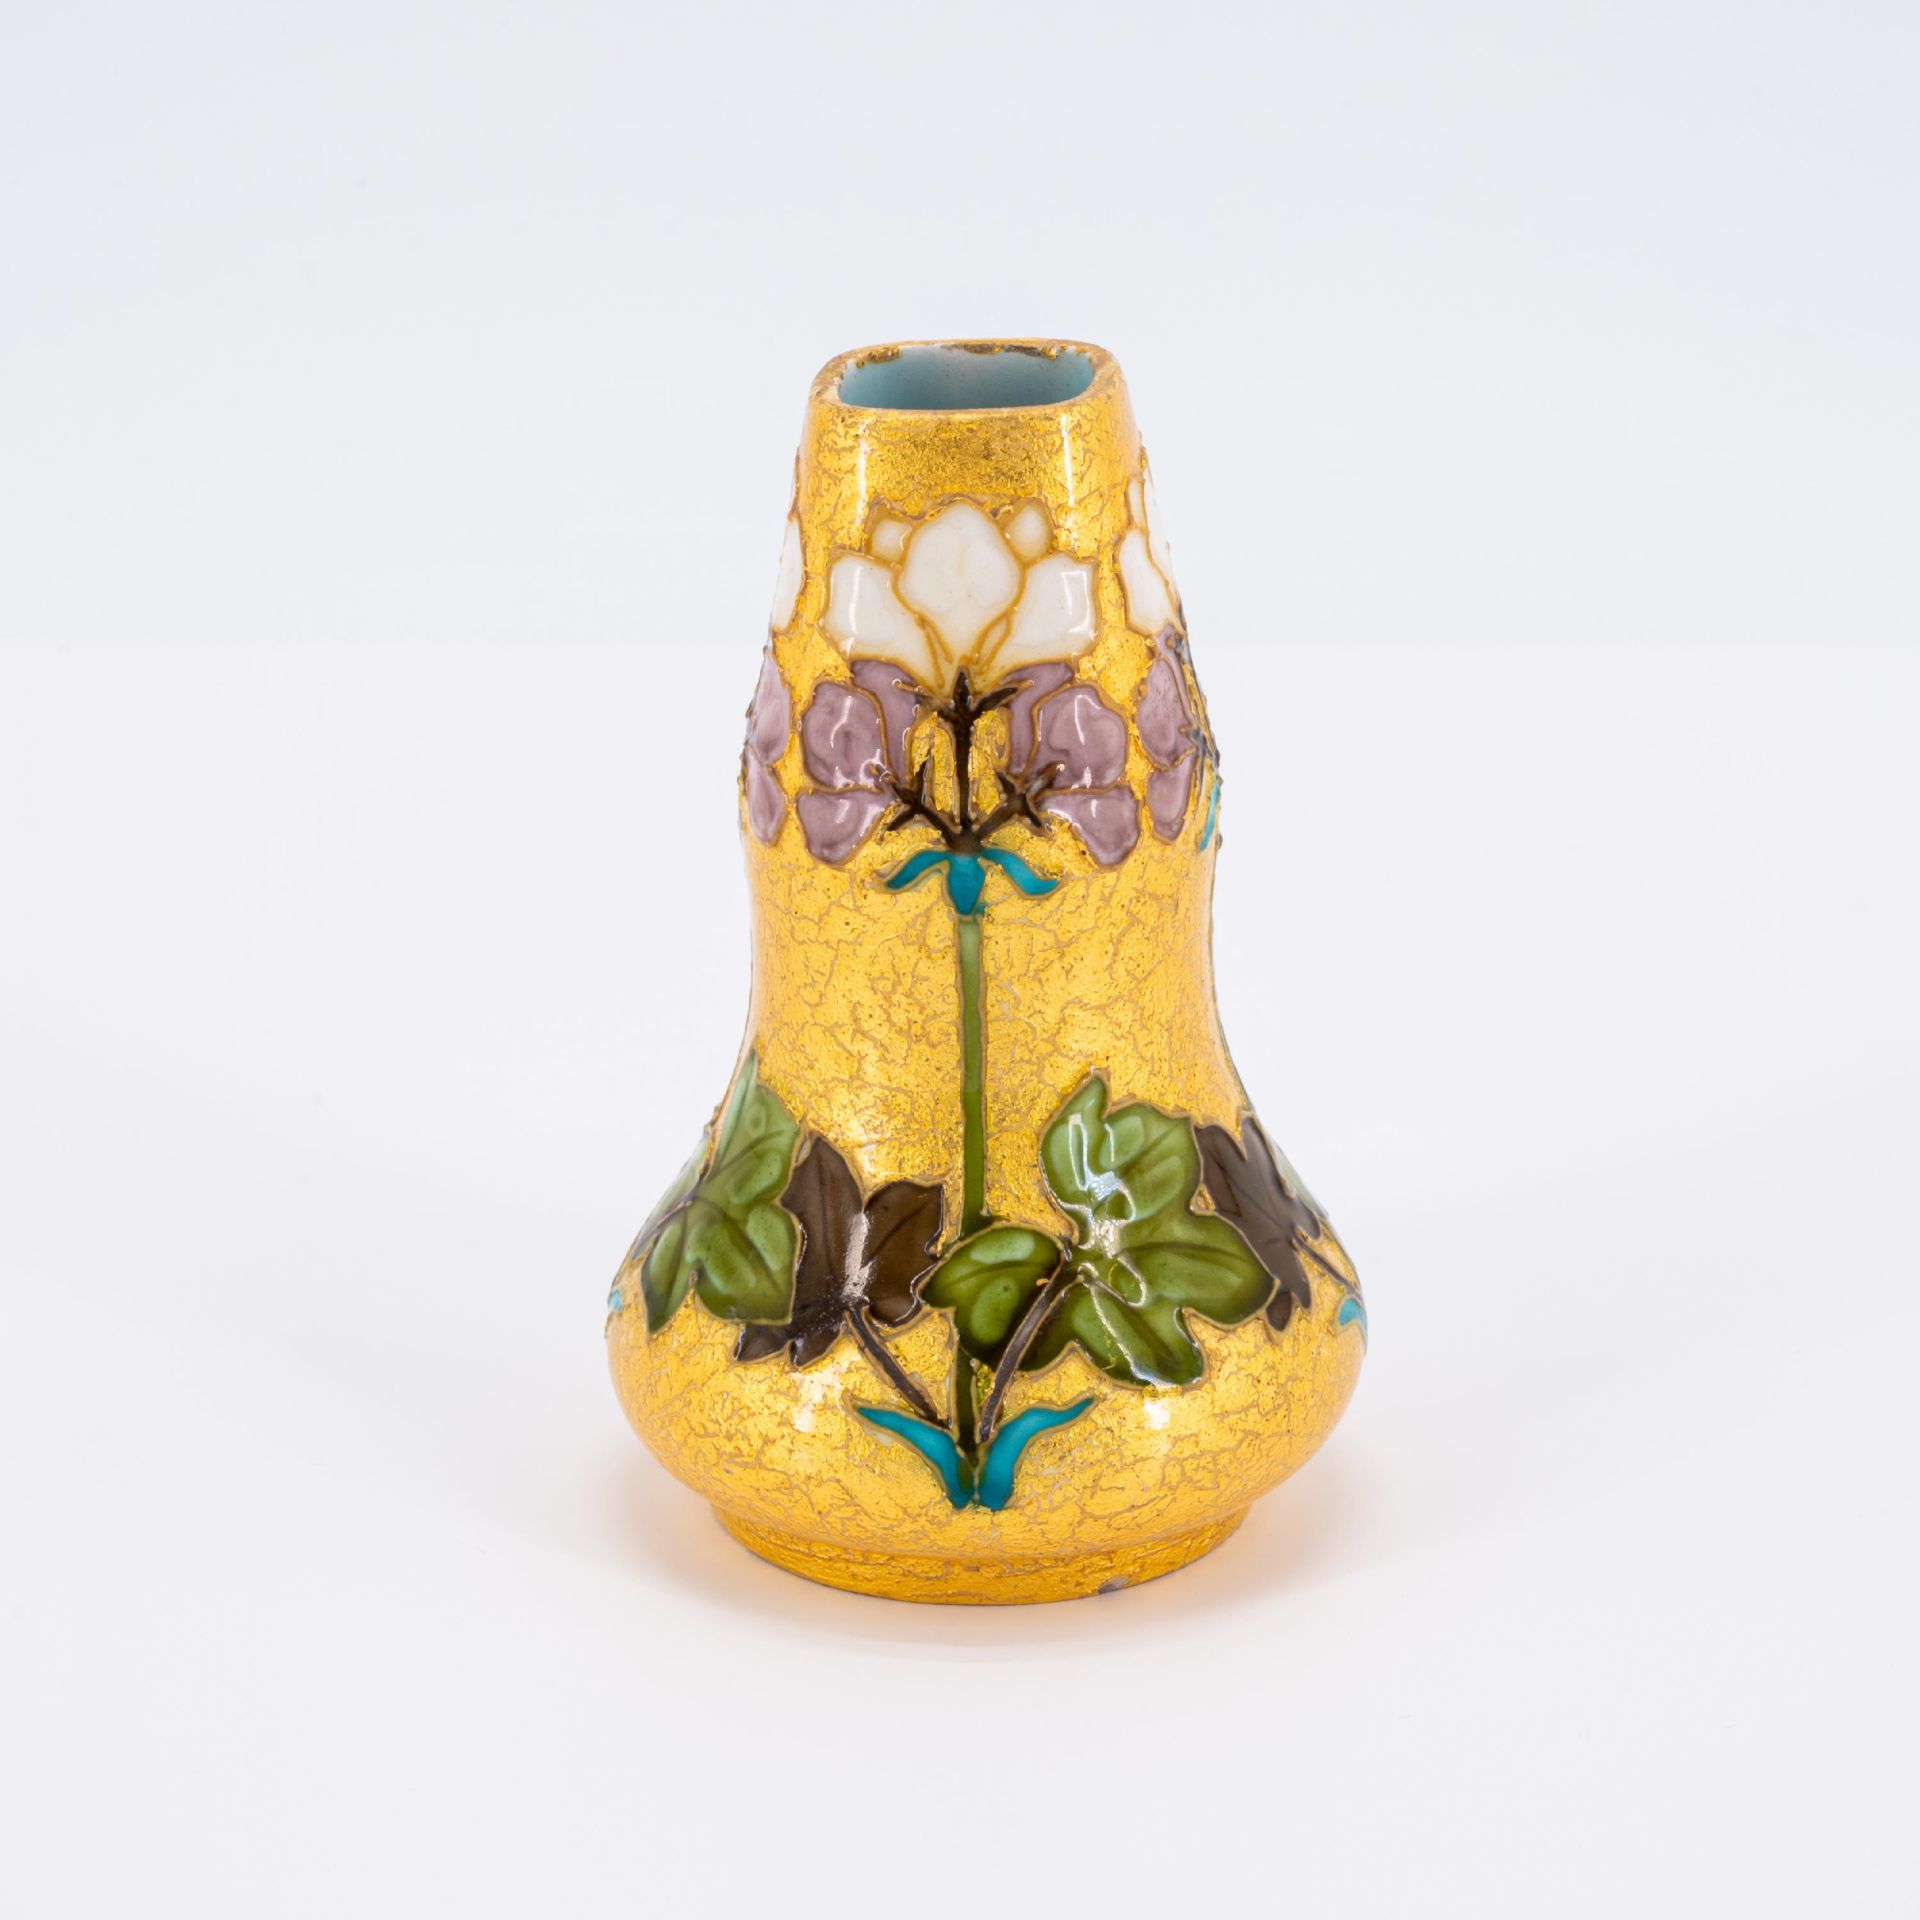 Small vase with floral decor - Image 3 of 7